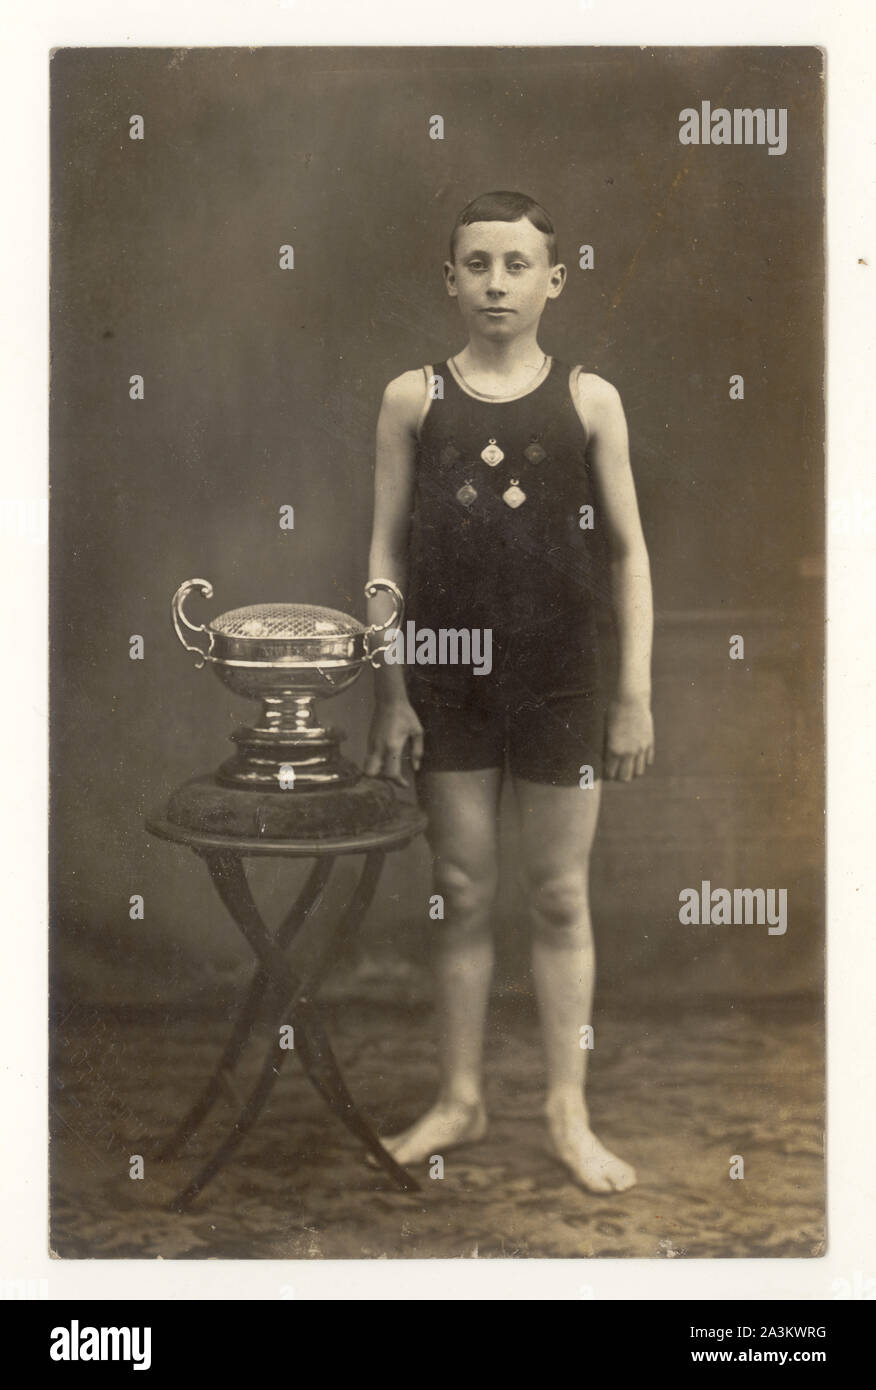 Early 1900's postcard of slim young boy wearing P.E. or swimming kit, with medals on his swimming costume, standing next to trophy cup, Hamilton, Lanarkshire, Scotland, U.K. Stock Photo